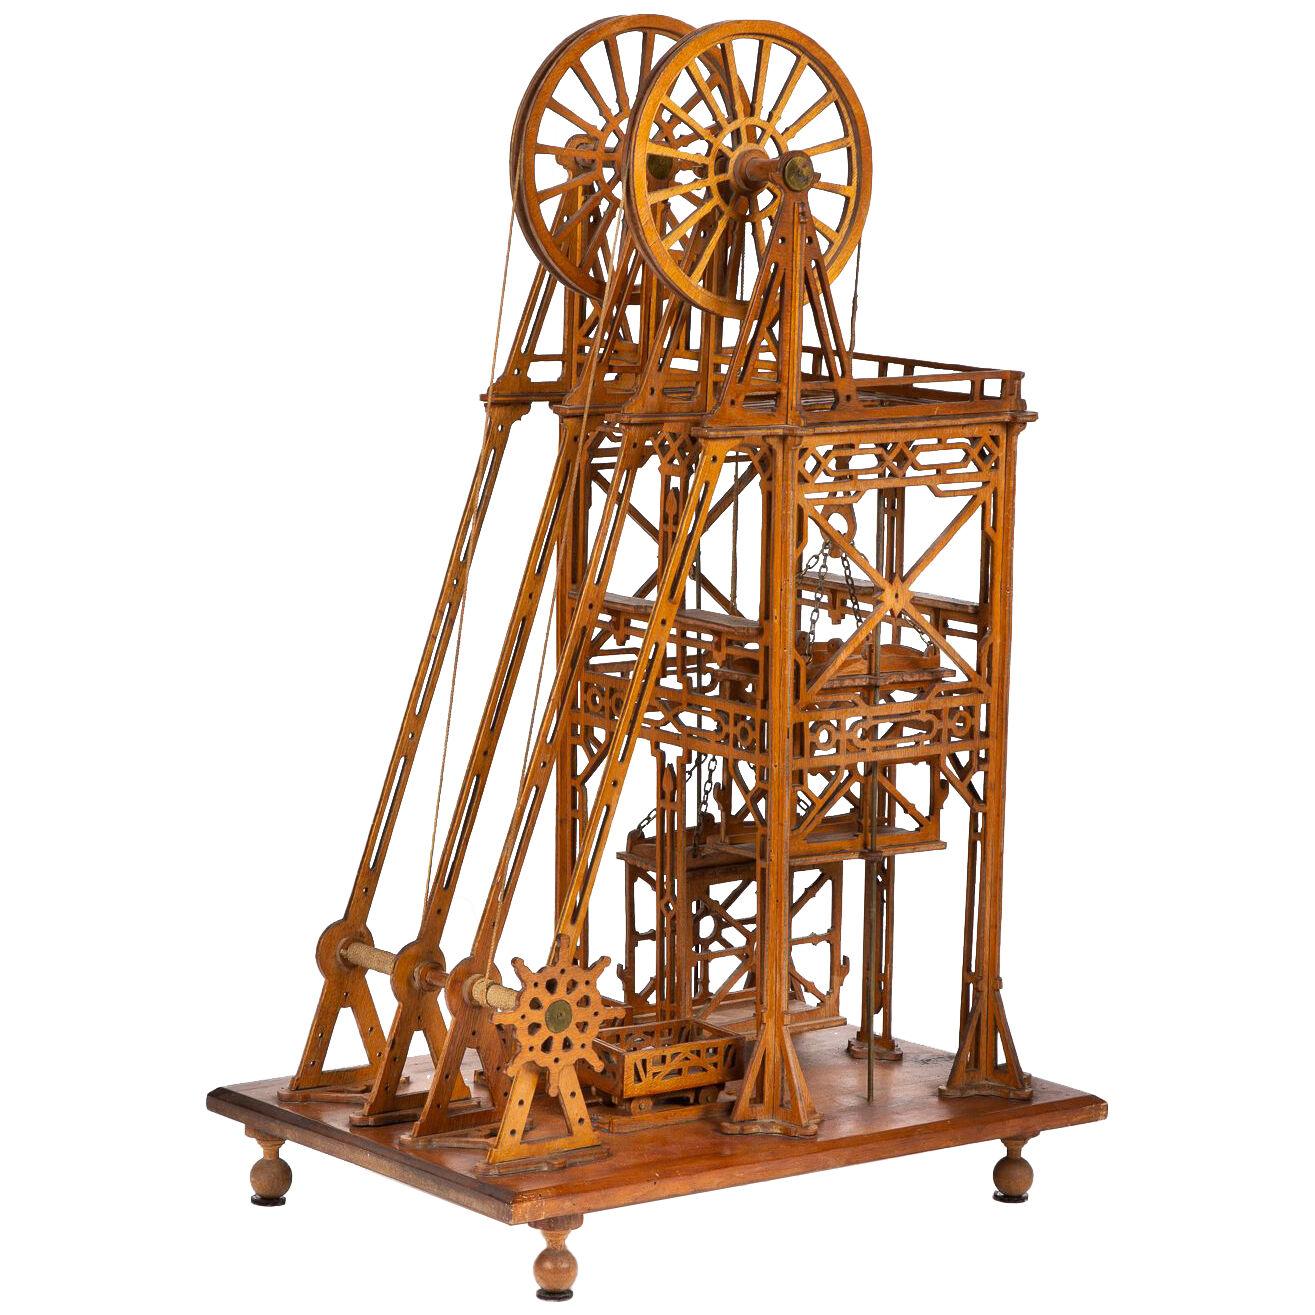 Architectural model of a mine pithead winding gear